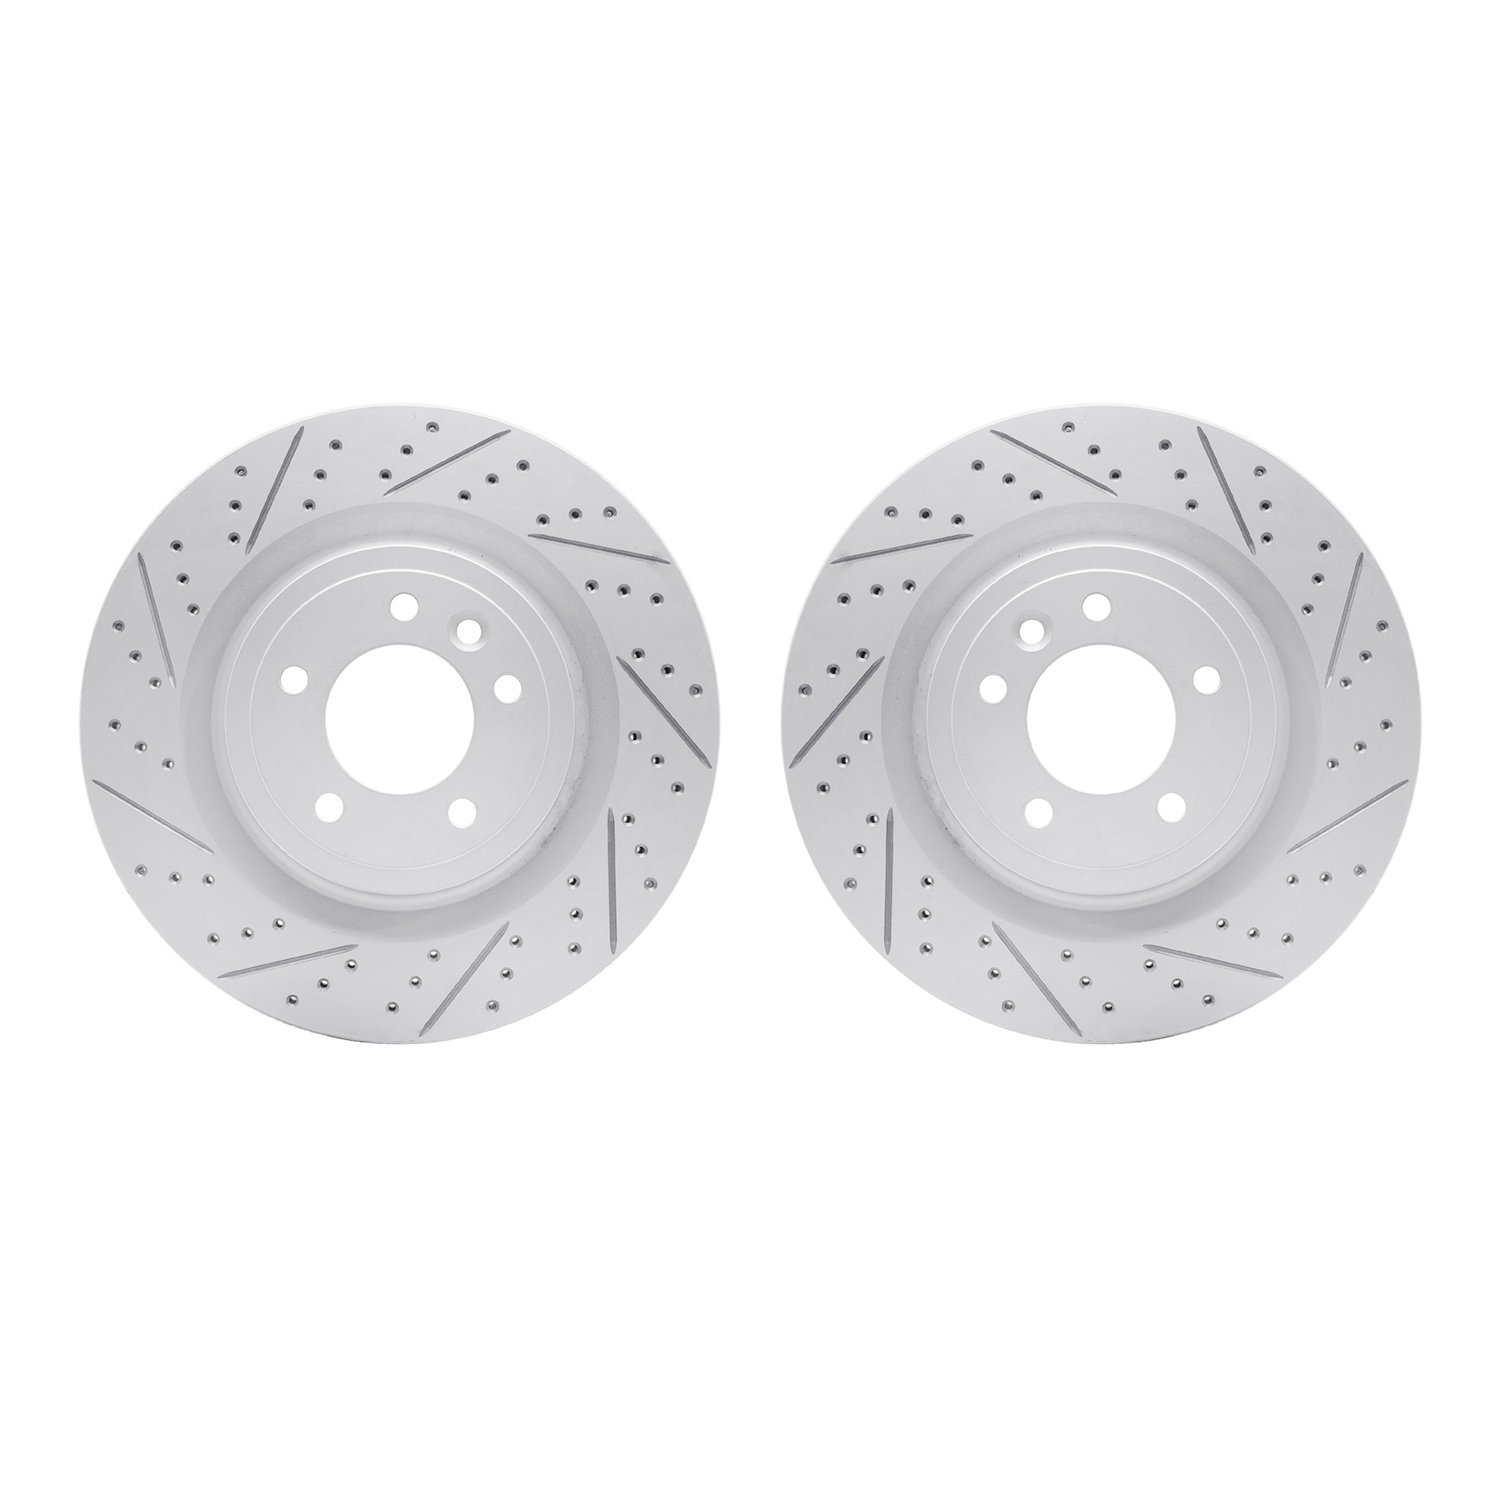 2002-11019 Geoperformance Drilled/Slotted Brake Rotors, Fits Select Land Rover, Position: Rear